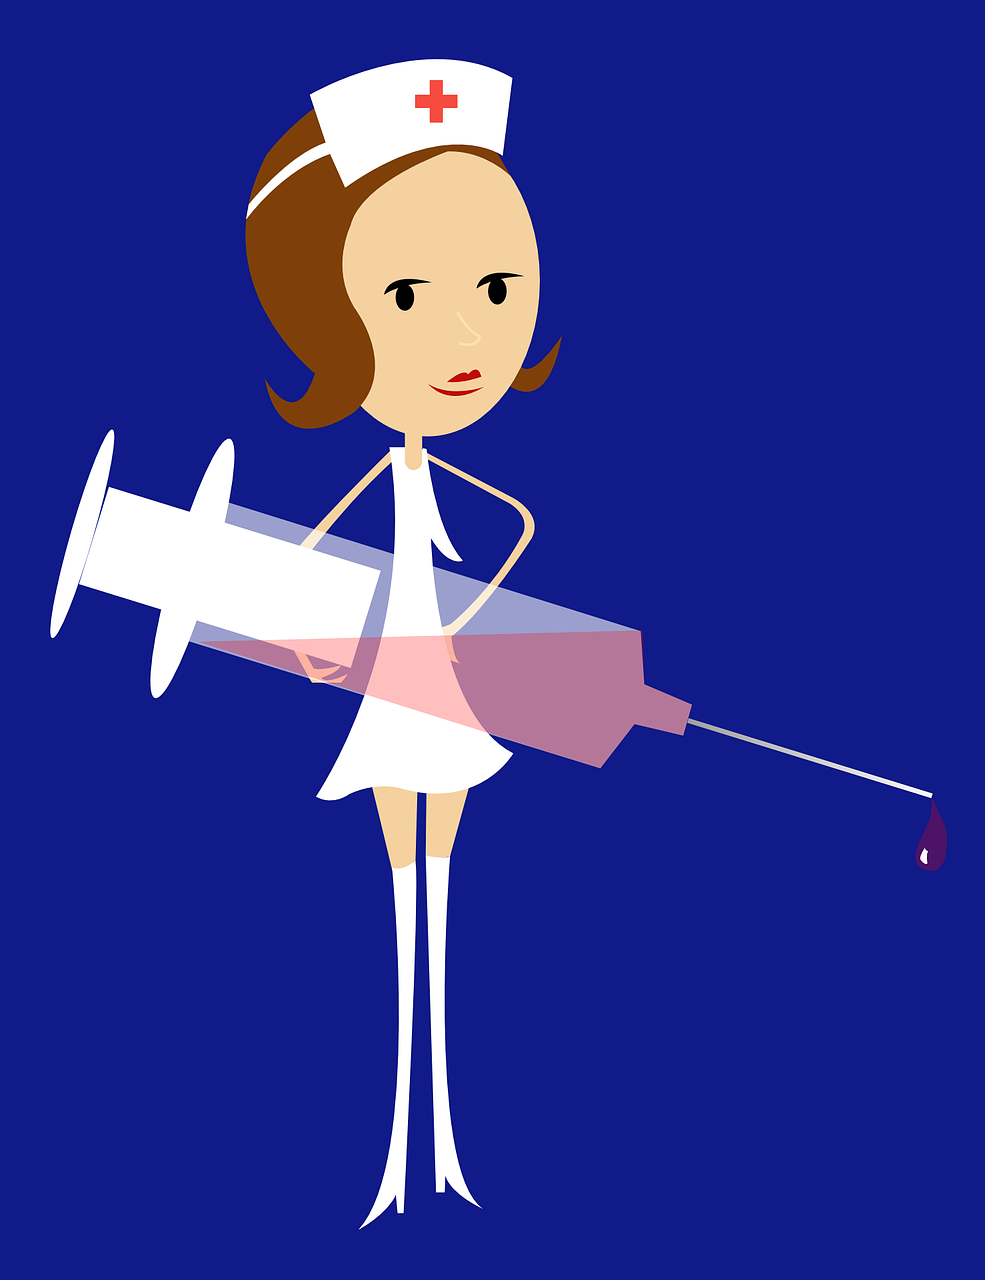 a cartoon nurse holding a giant syll, an illustration of, pop art, syringe, nico wearing a white dress, wikihow illustration, a beautiful artwork illustration